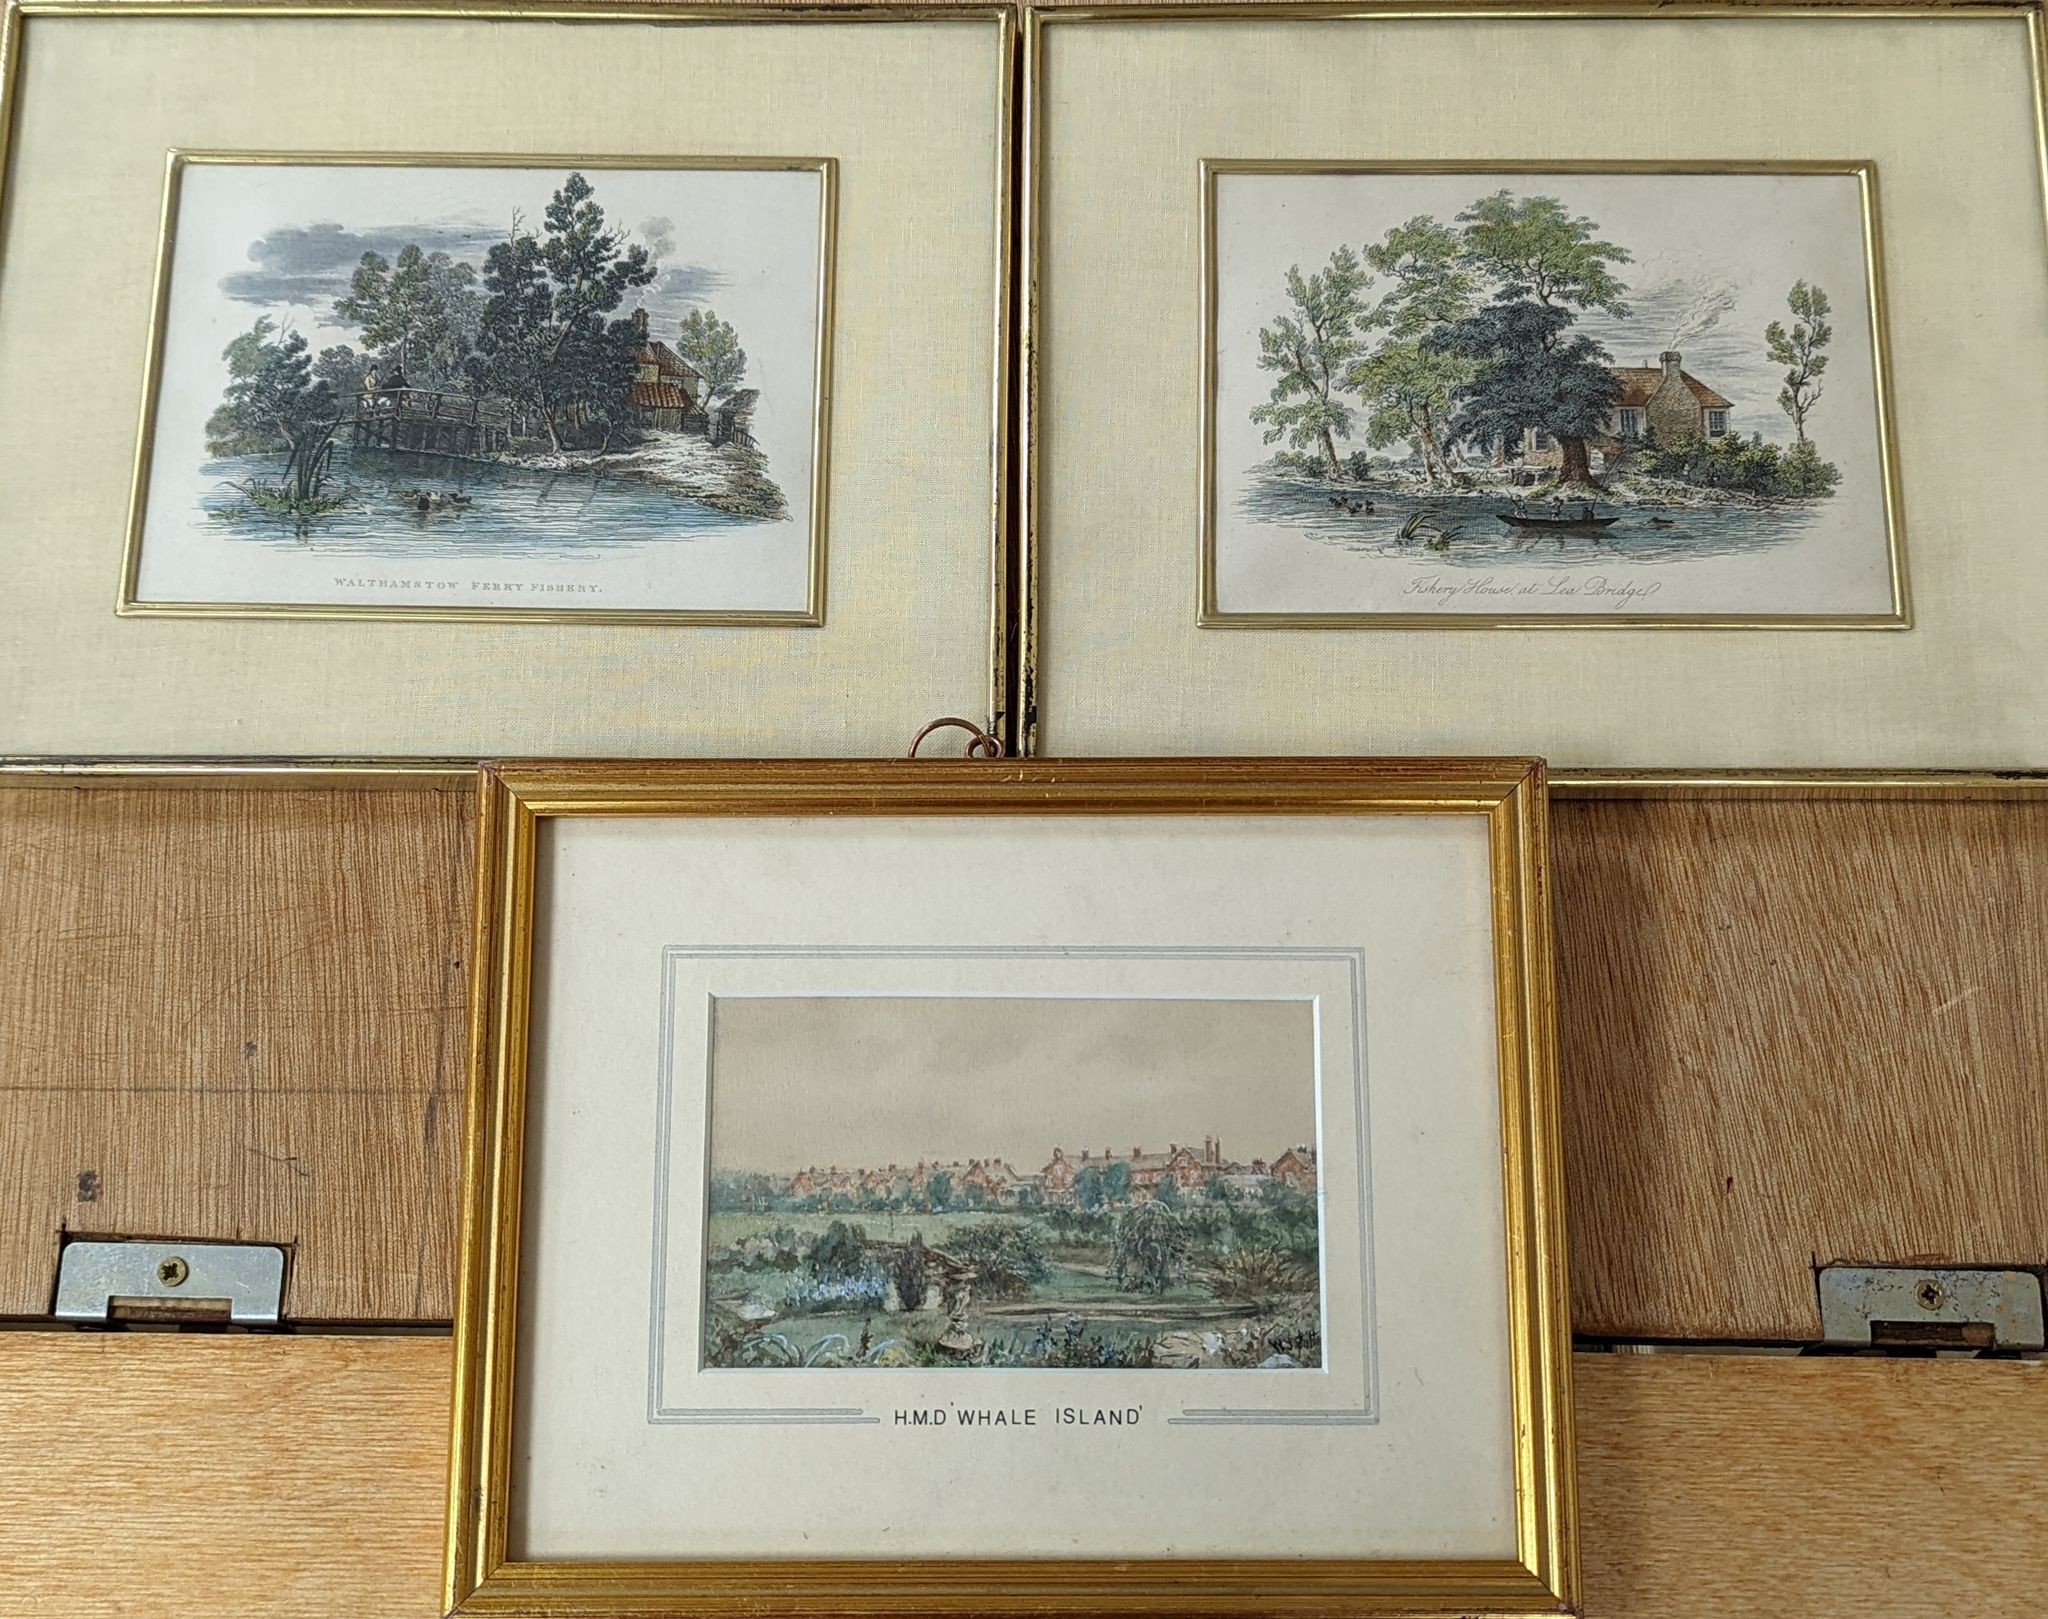 W. Y. Sutton, watercolour, H.M.D. Whale Island, signed, 8 x 14cm, with a pair of sporting magazine coloured engravings